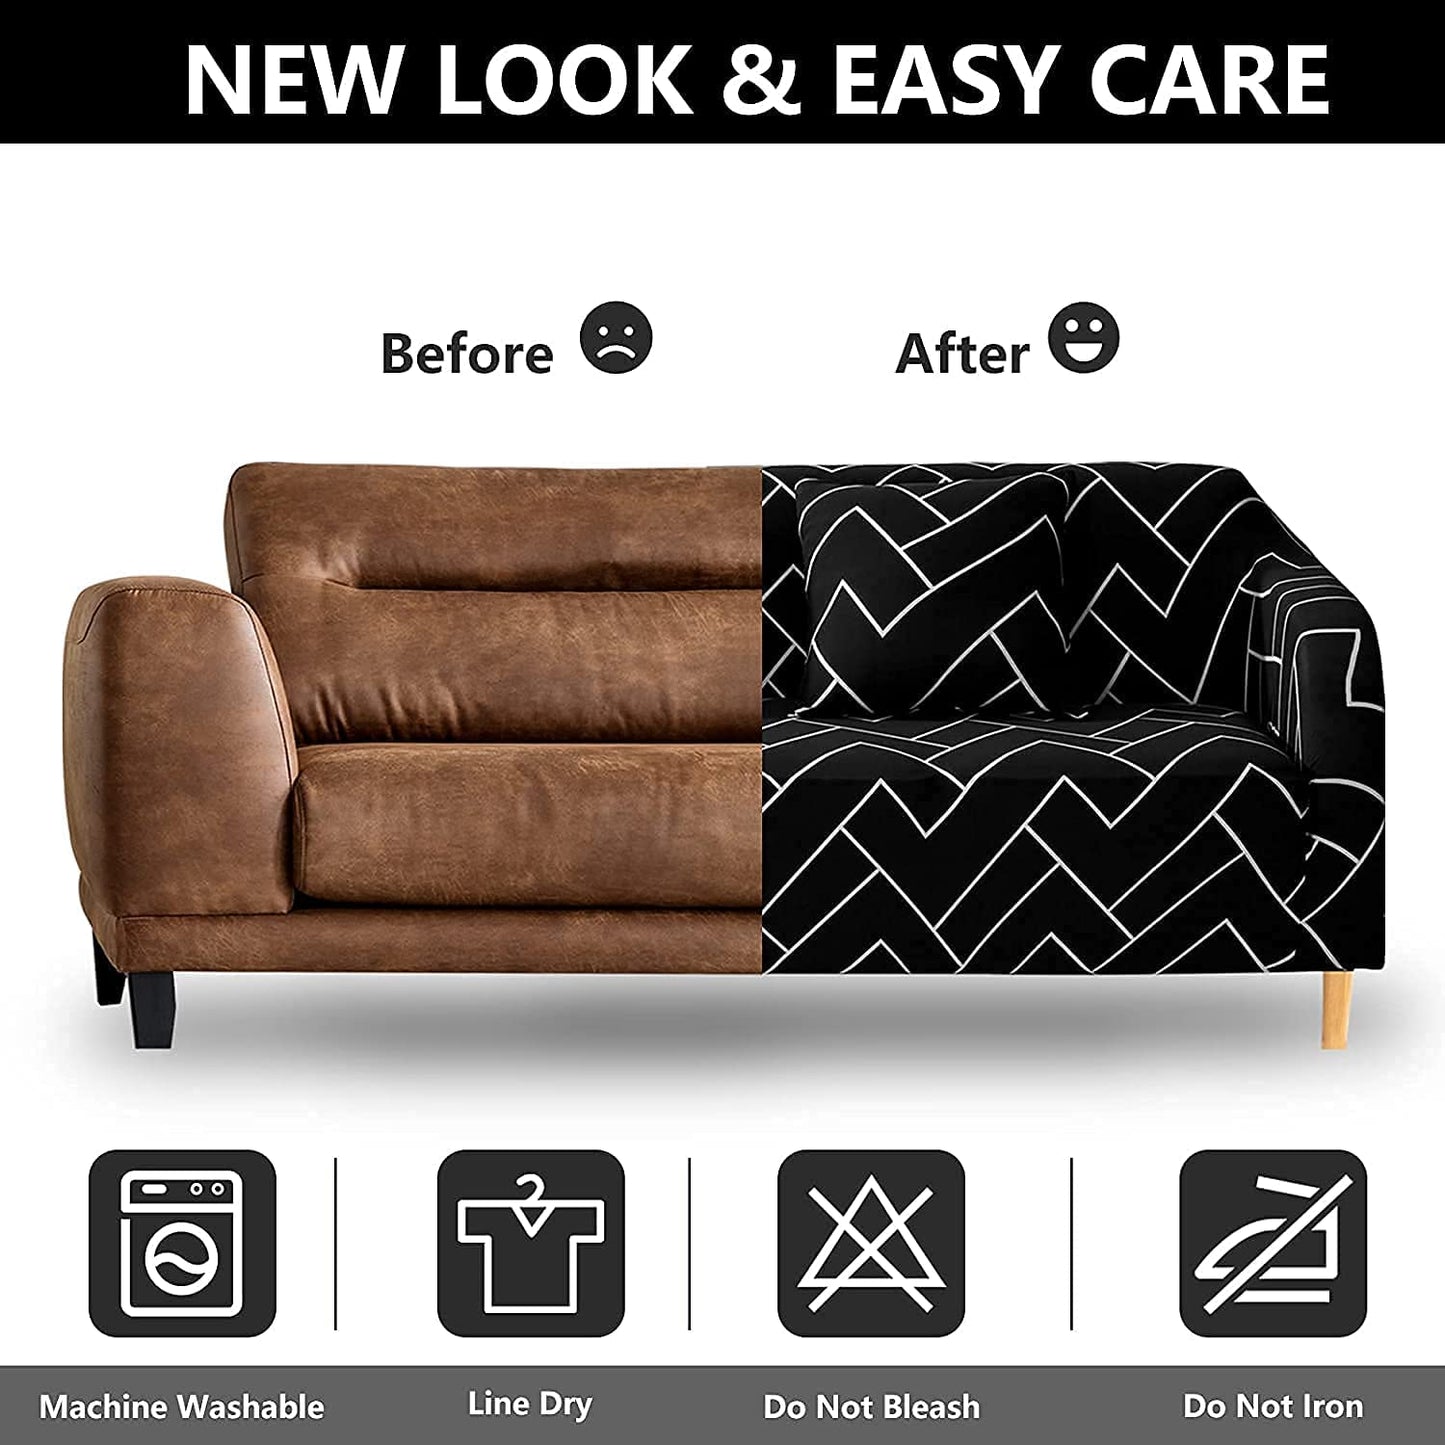 Geometric Pattern Sofa Slipcover Stretch Arm Chair Large Sofa Slipcover with 2 Pillow Cover Leather Furniture Protector for 3-Seat Sofa